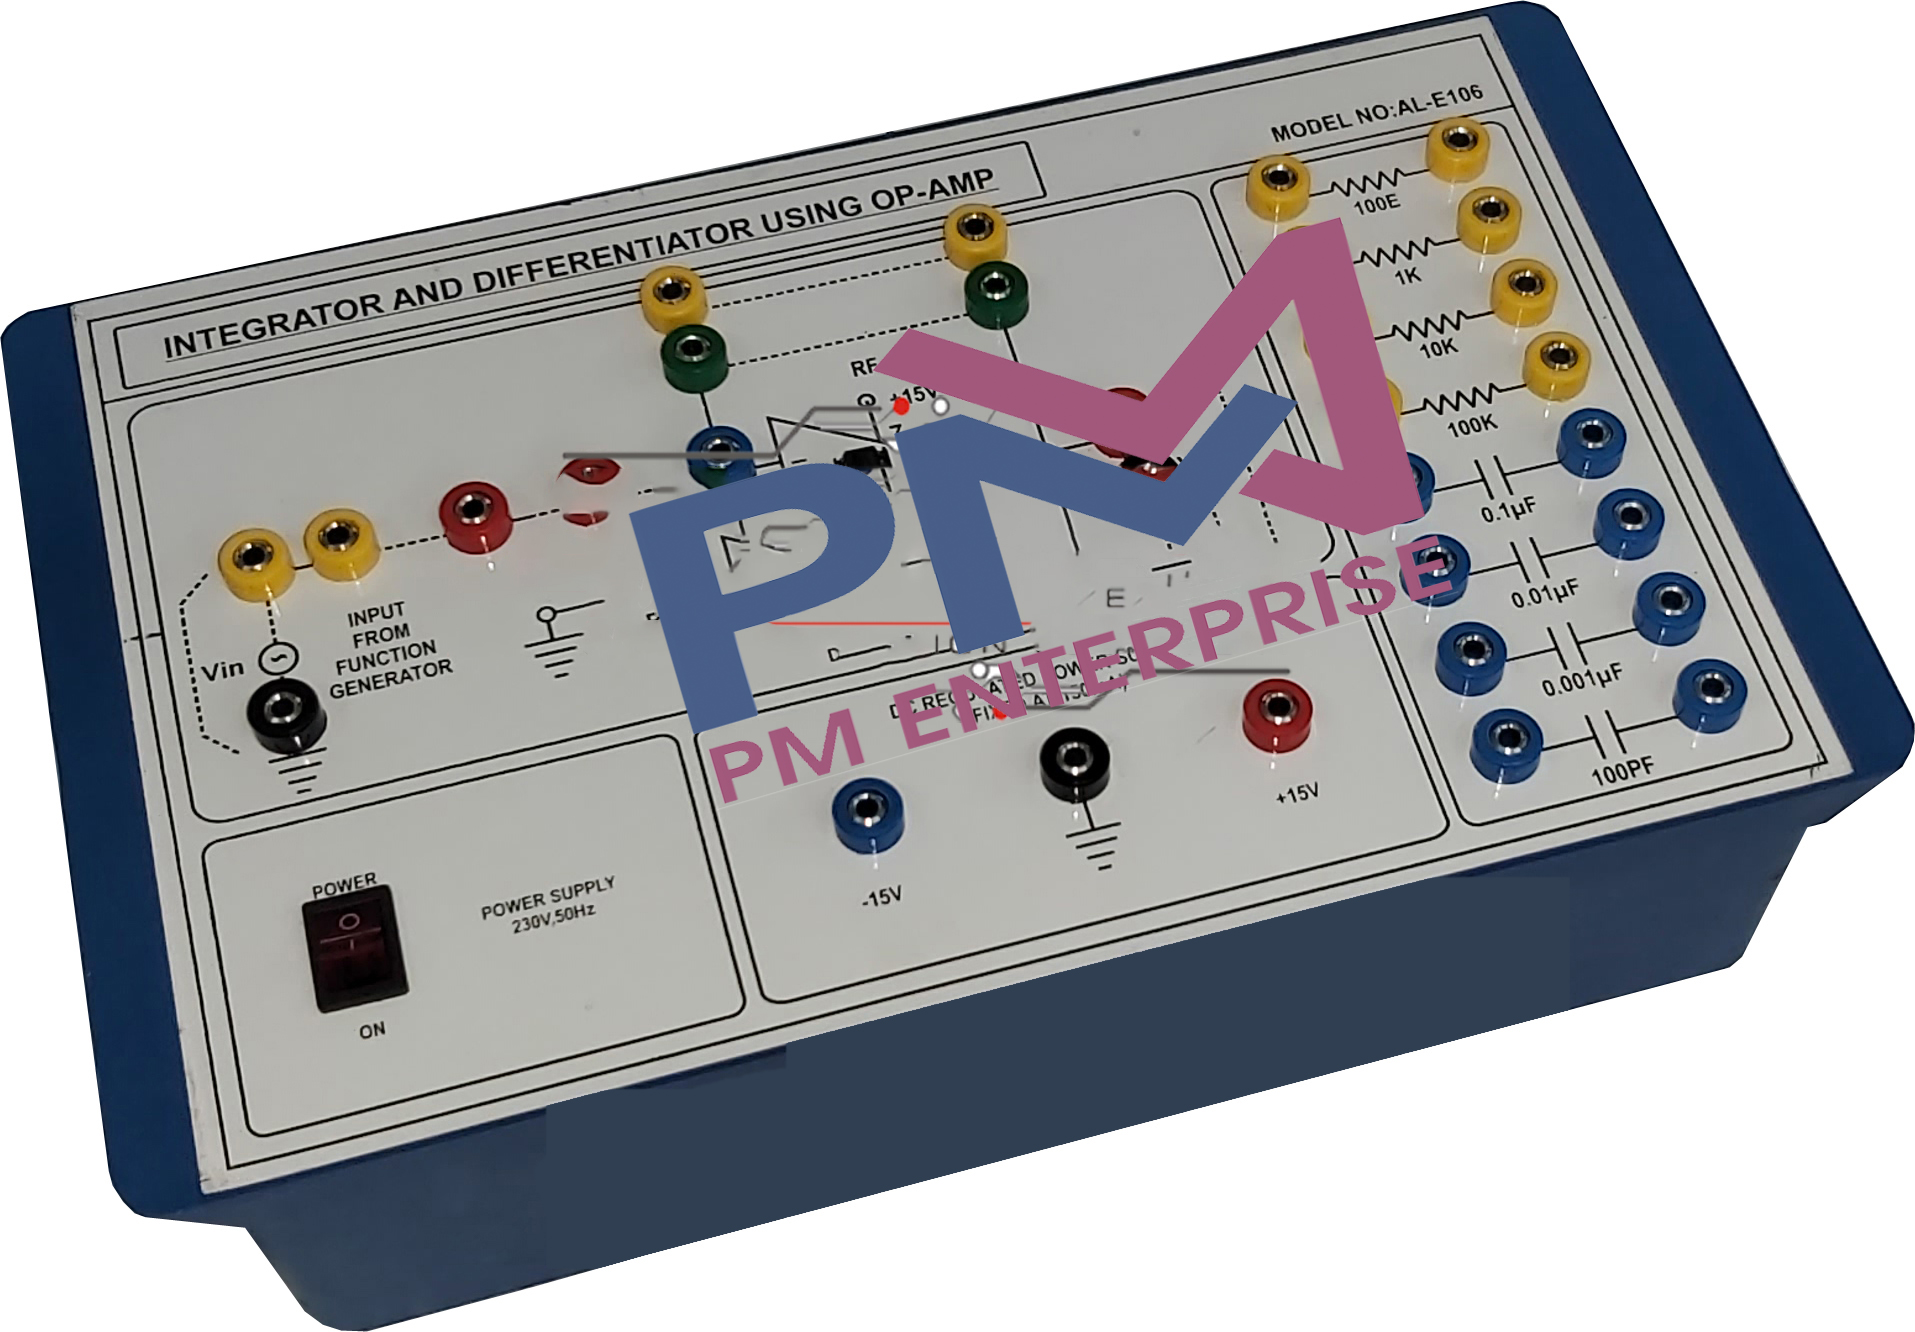 PM-P106 OP-AMP AS INTEGRATOR AND DIFFERENTIATOR TRAINER 